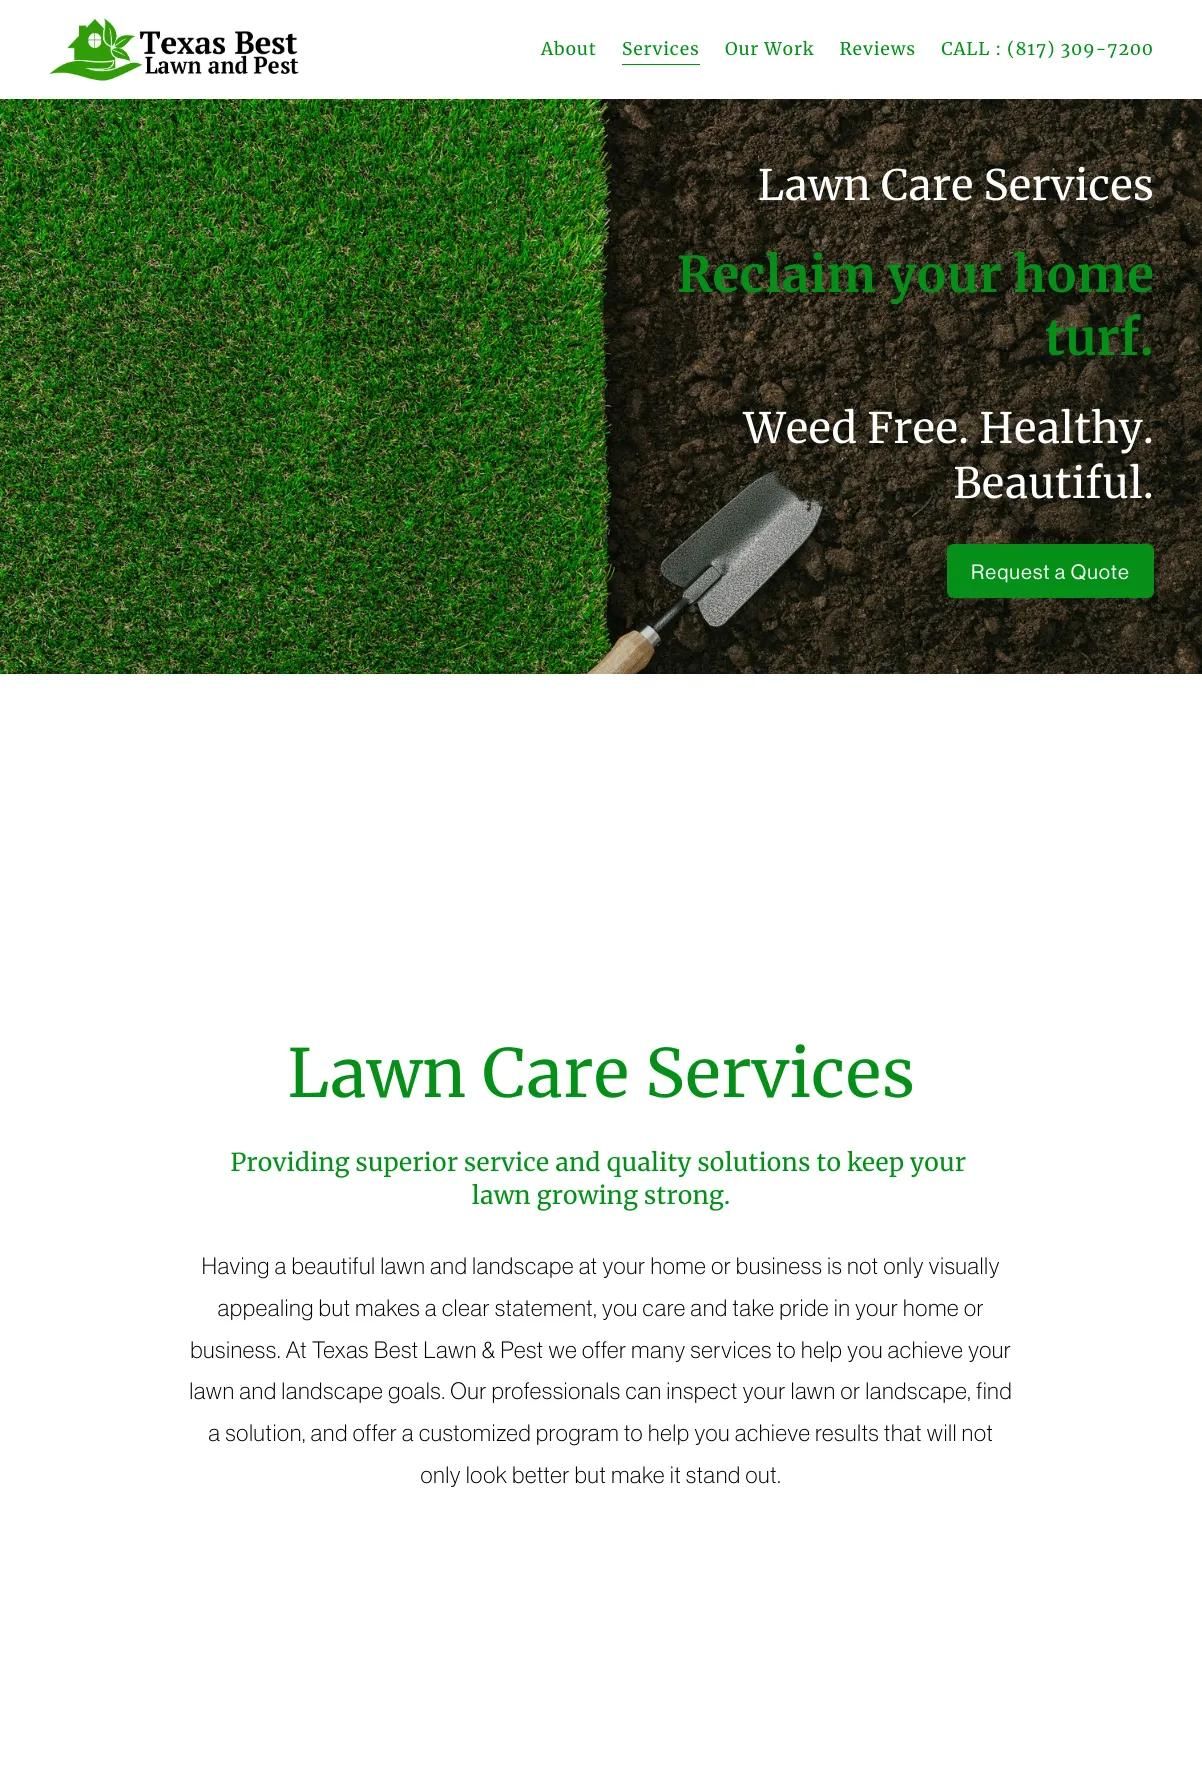 Screenshot 2 of Texas Best Lawn & Pest (Example Squarespace Lawn Care Website)